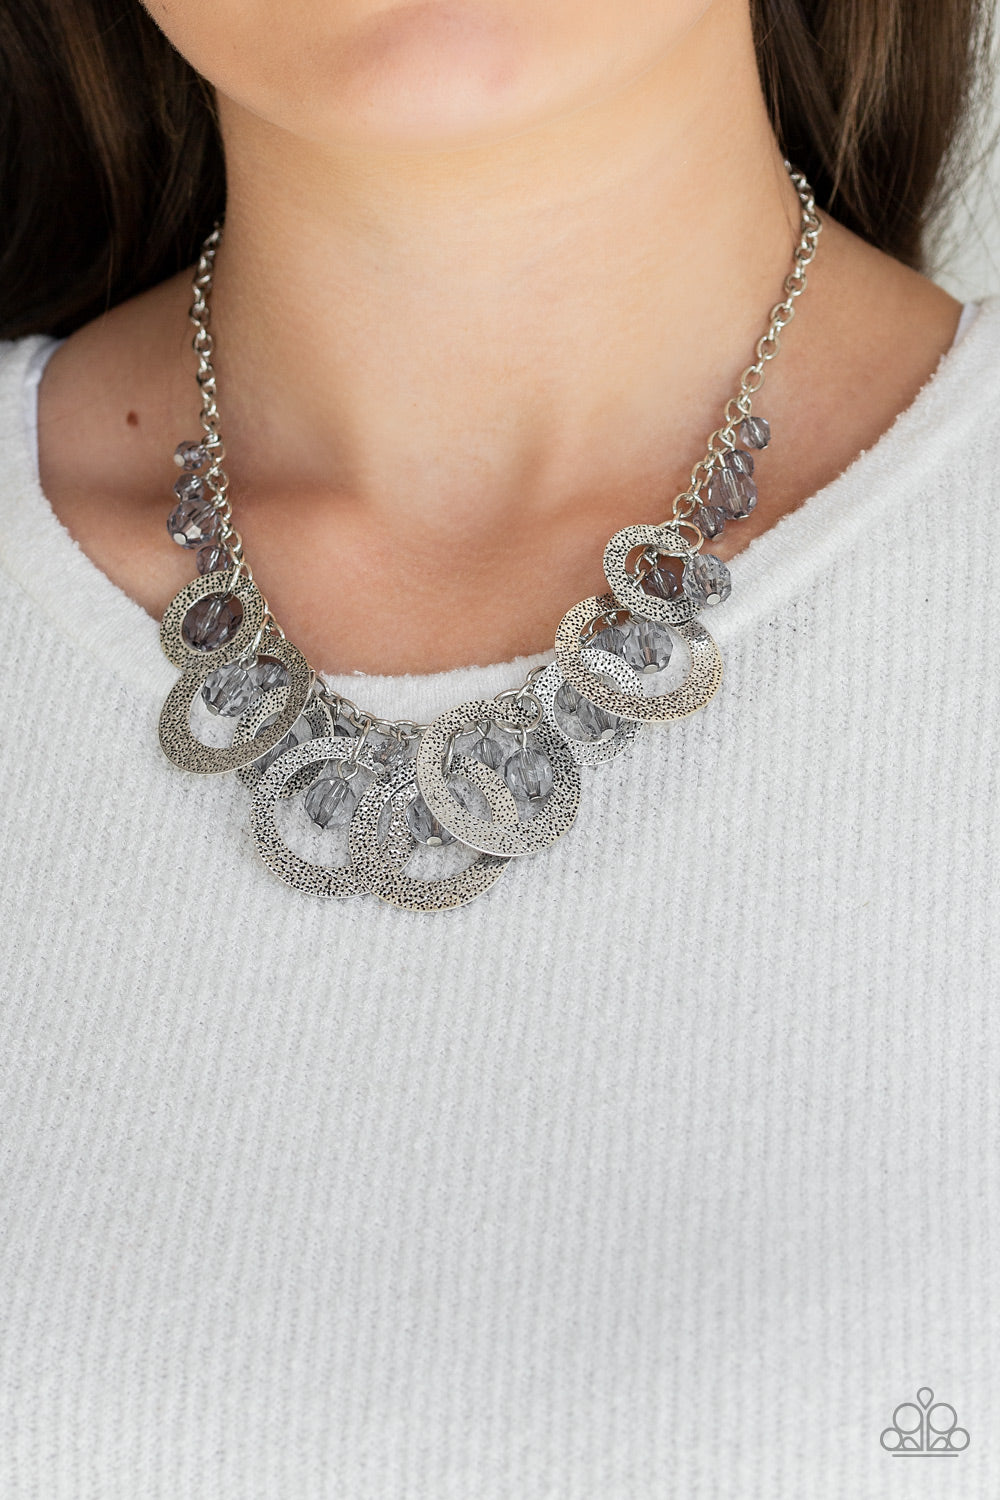 Turn It Up Necklace - Silver